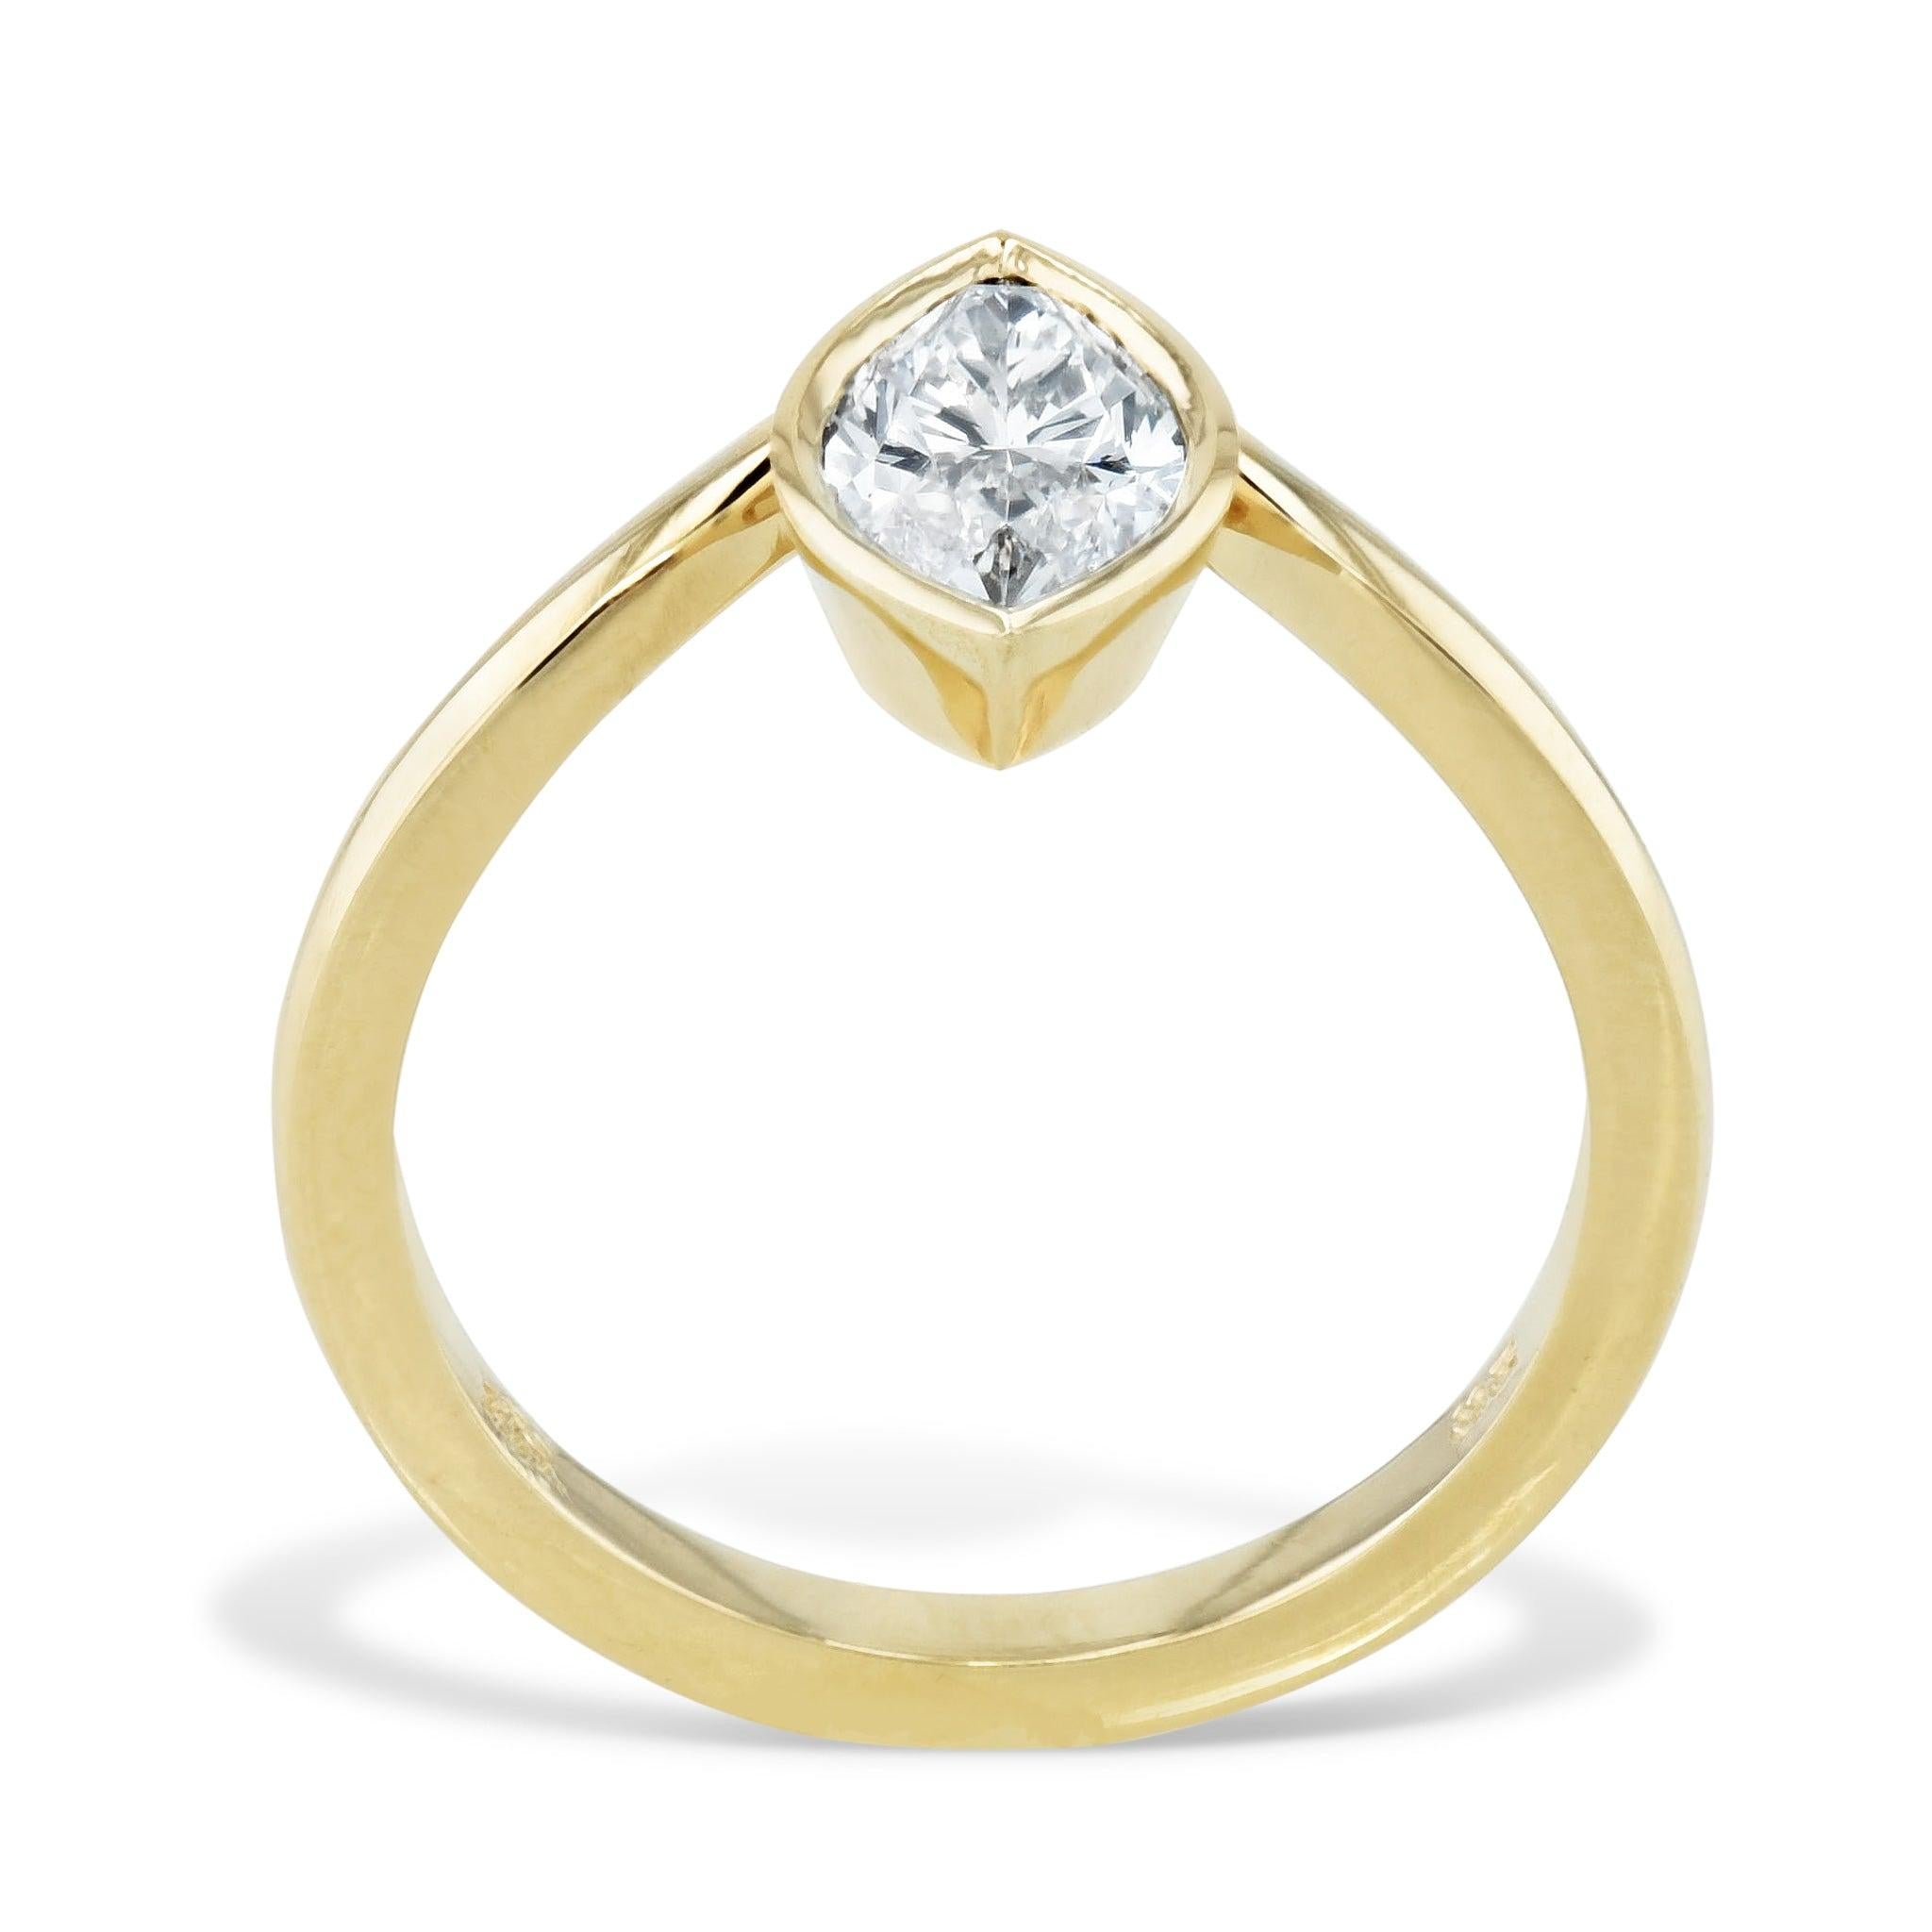 Discover the Marquise Diamond Yellow Gold Engagement Ring from the H&H Collection. 
This ring is Handcrafted with 18kt yellow gold and featuring a bezel set center diamond with GIA # 5201384236 and is one of a kind. 
This ring is currently a size